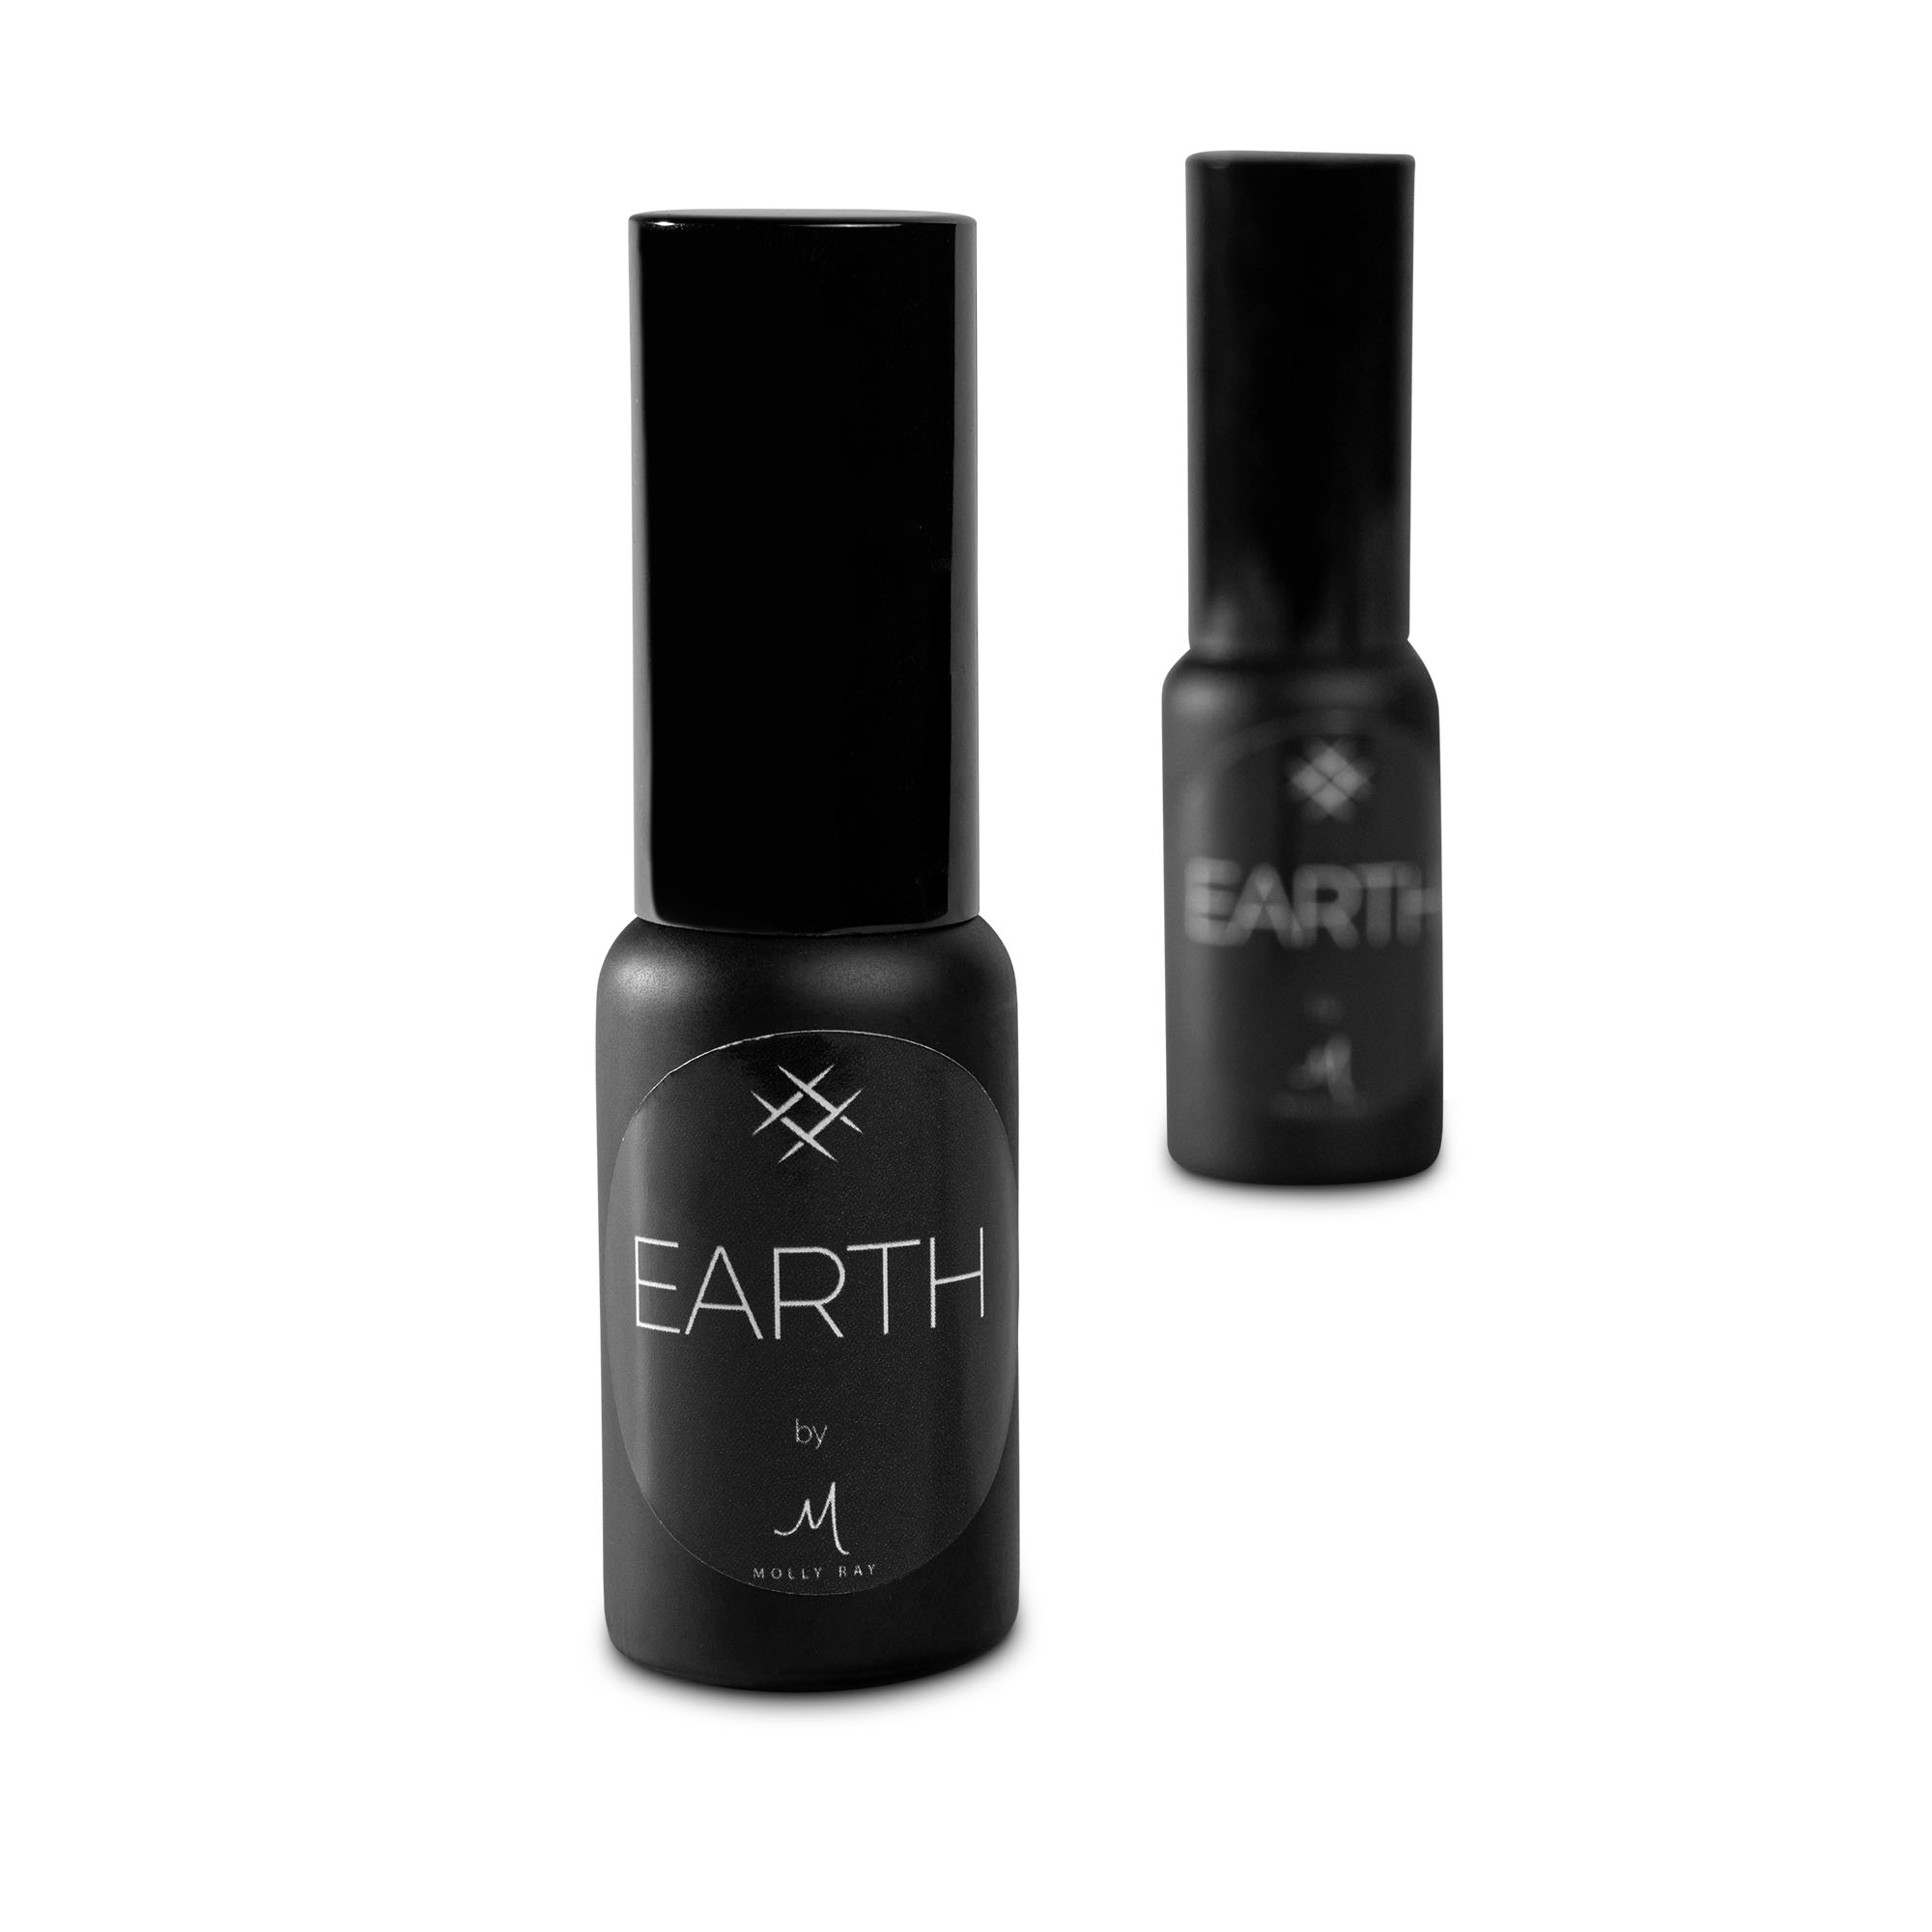 Earch Fragrance-2